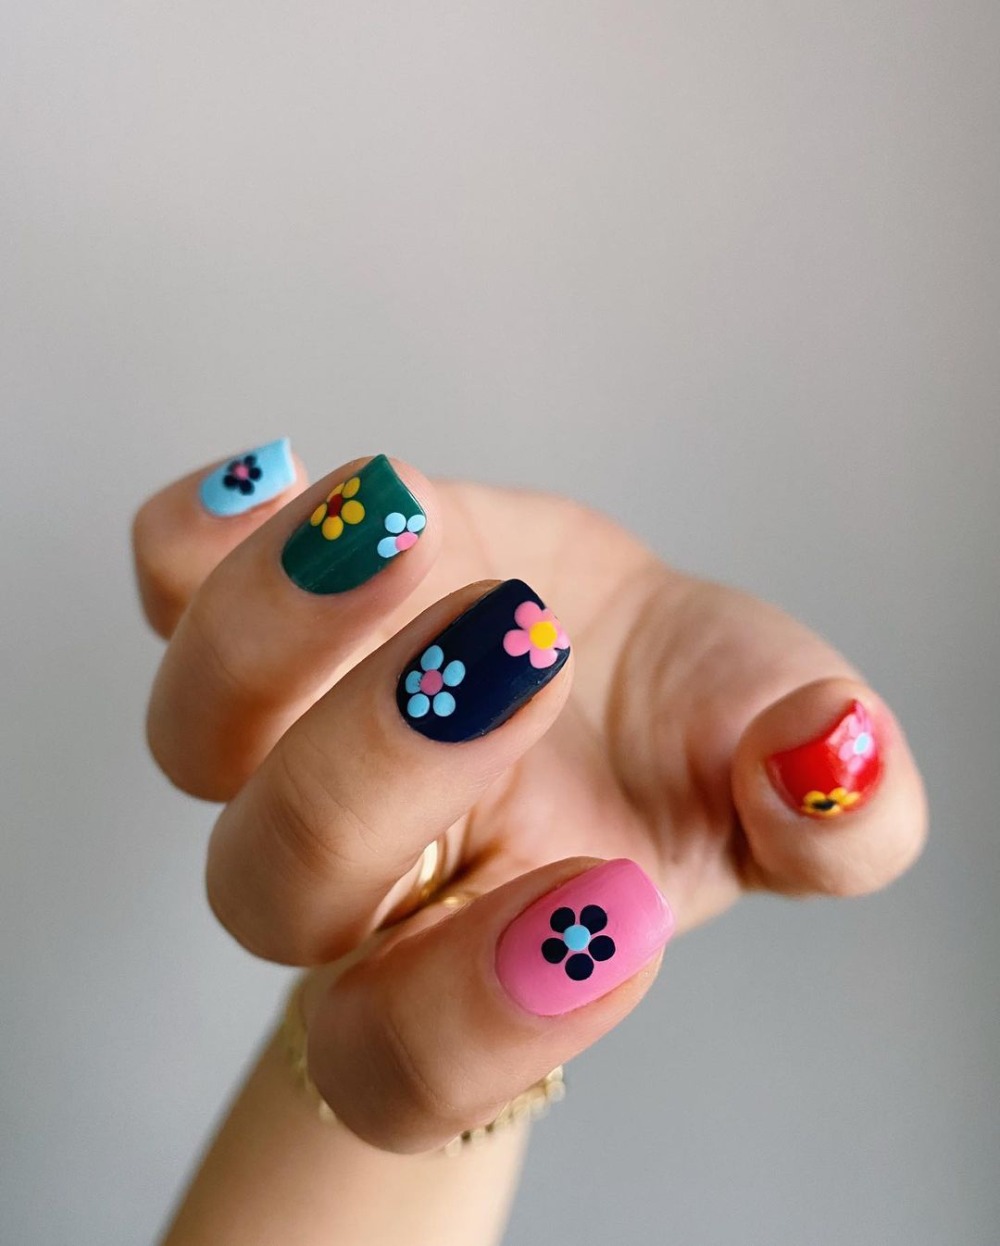 40 + Inspiring Floral Nail Design Ideas To Brighten Your Day